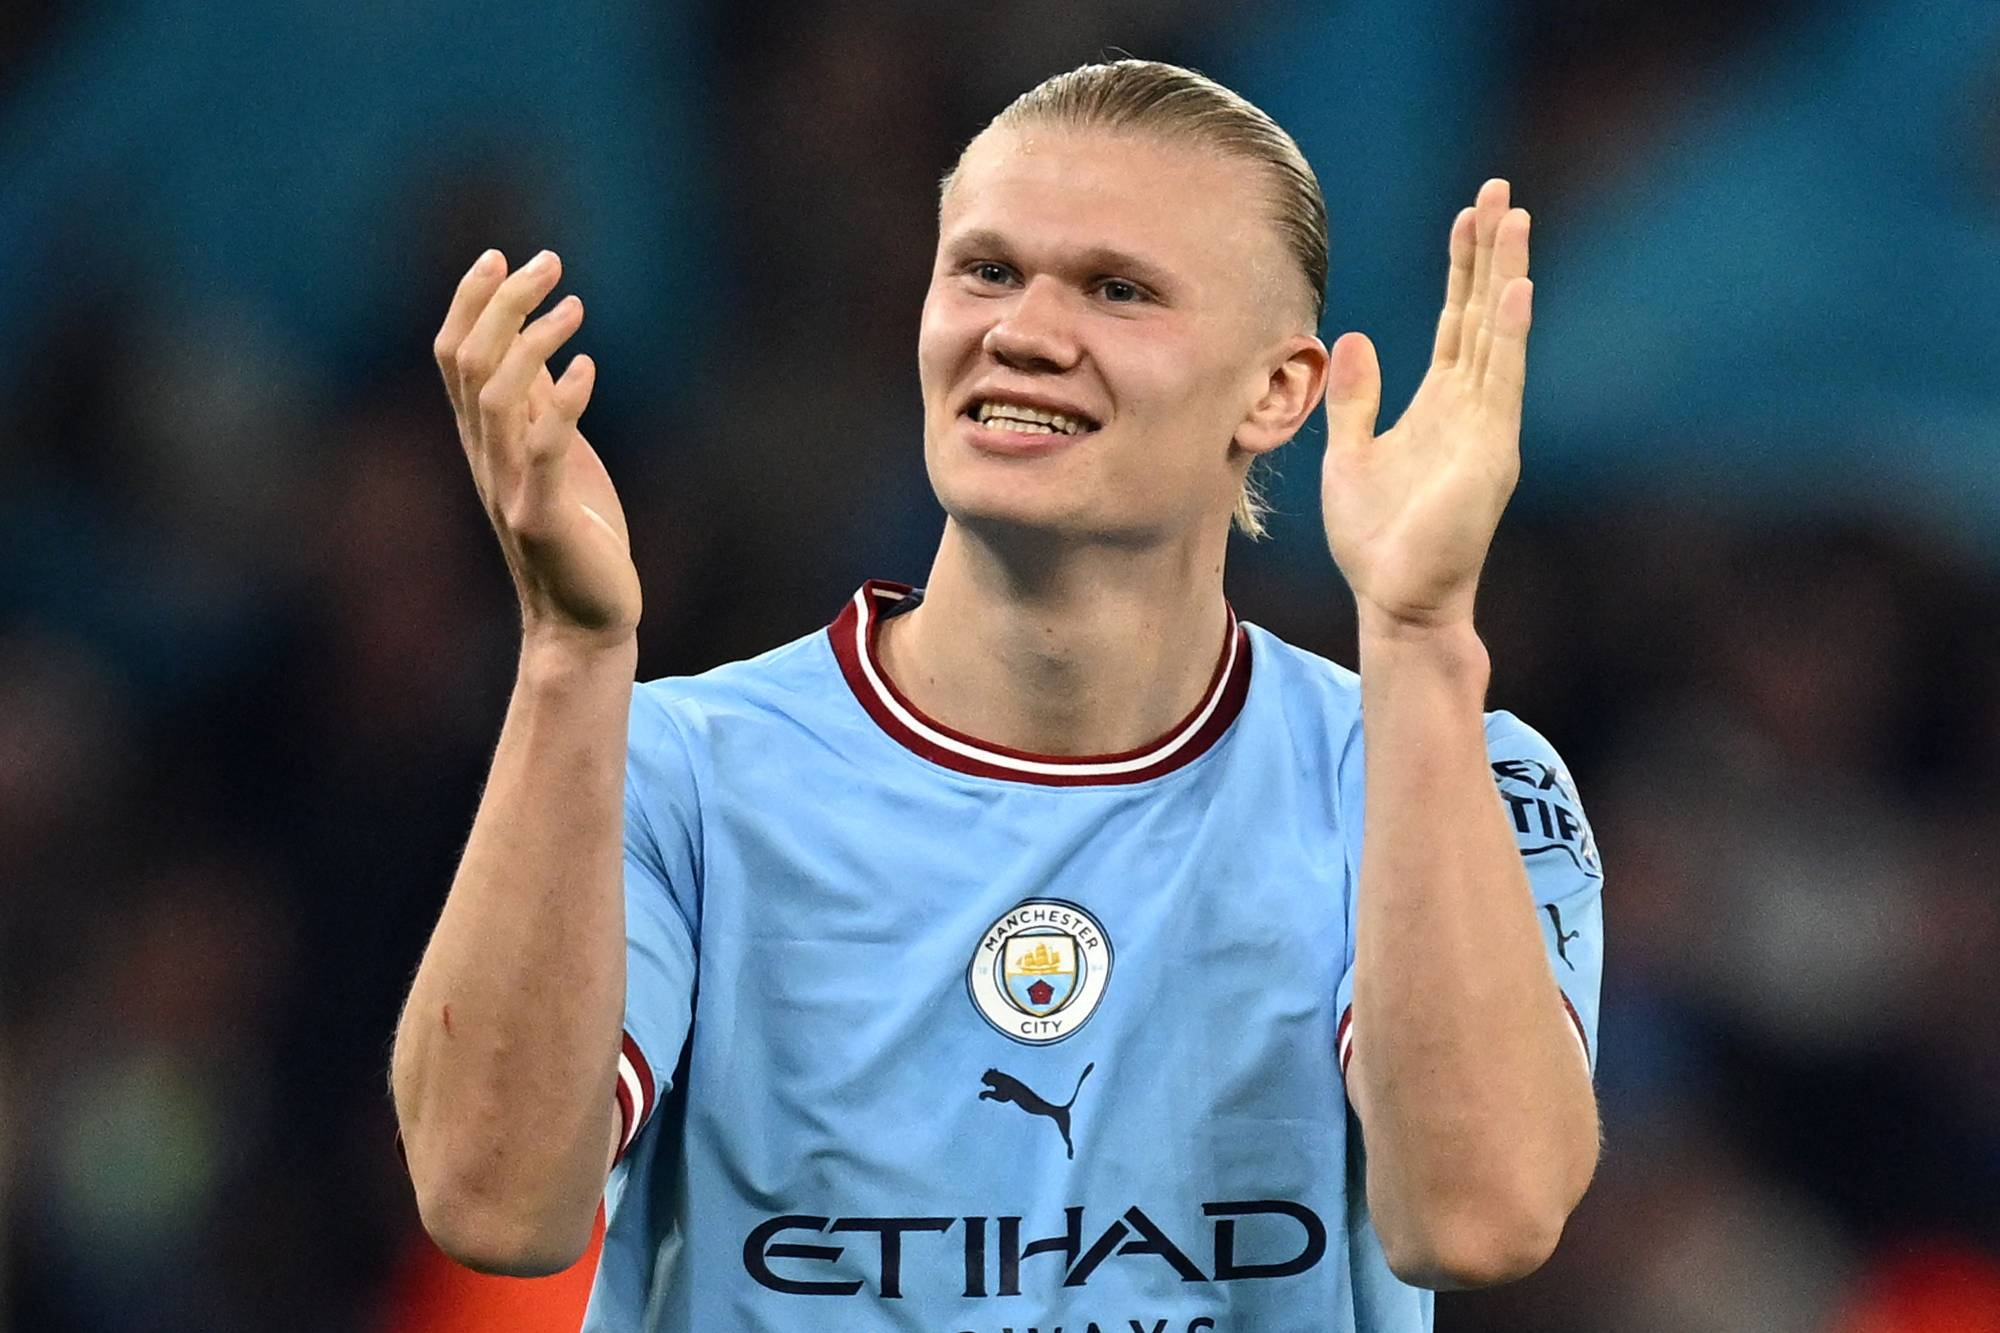 Erling Haaland is a rising striker of Manchester City